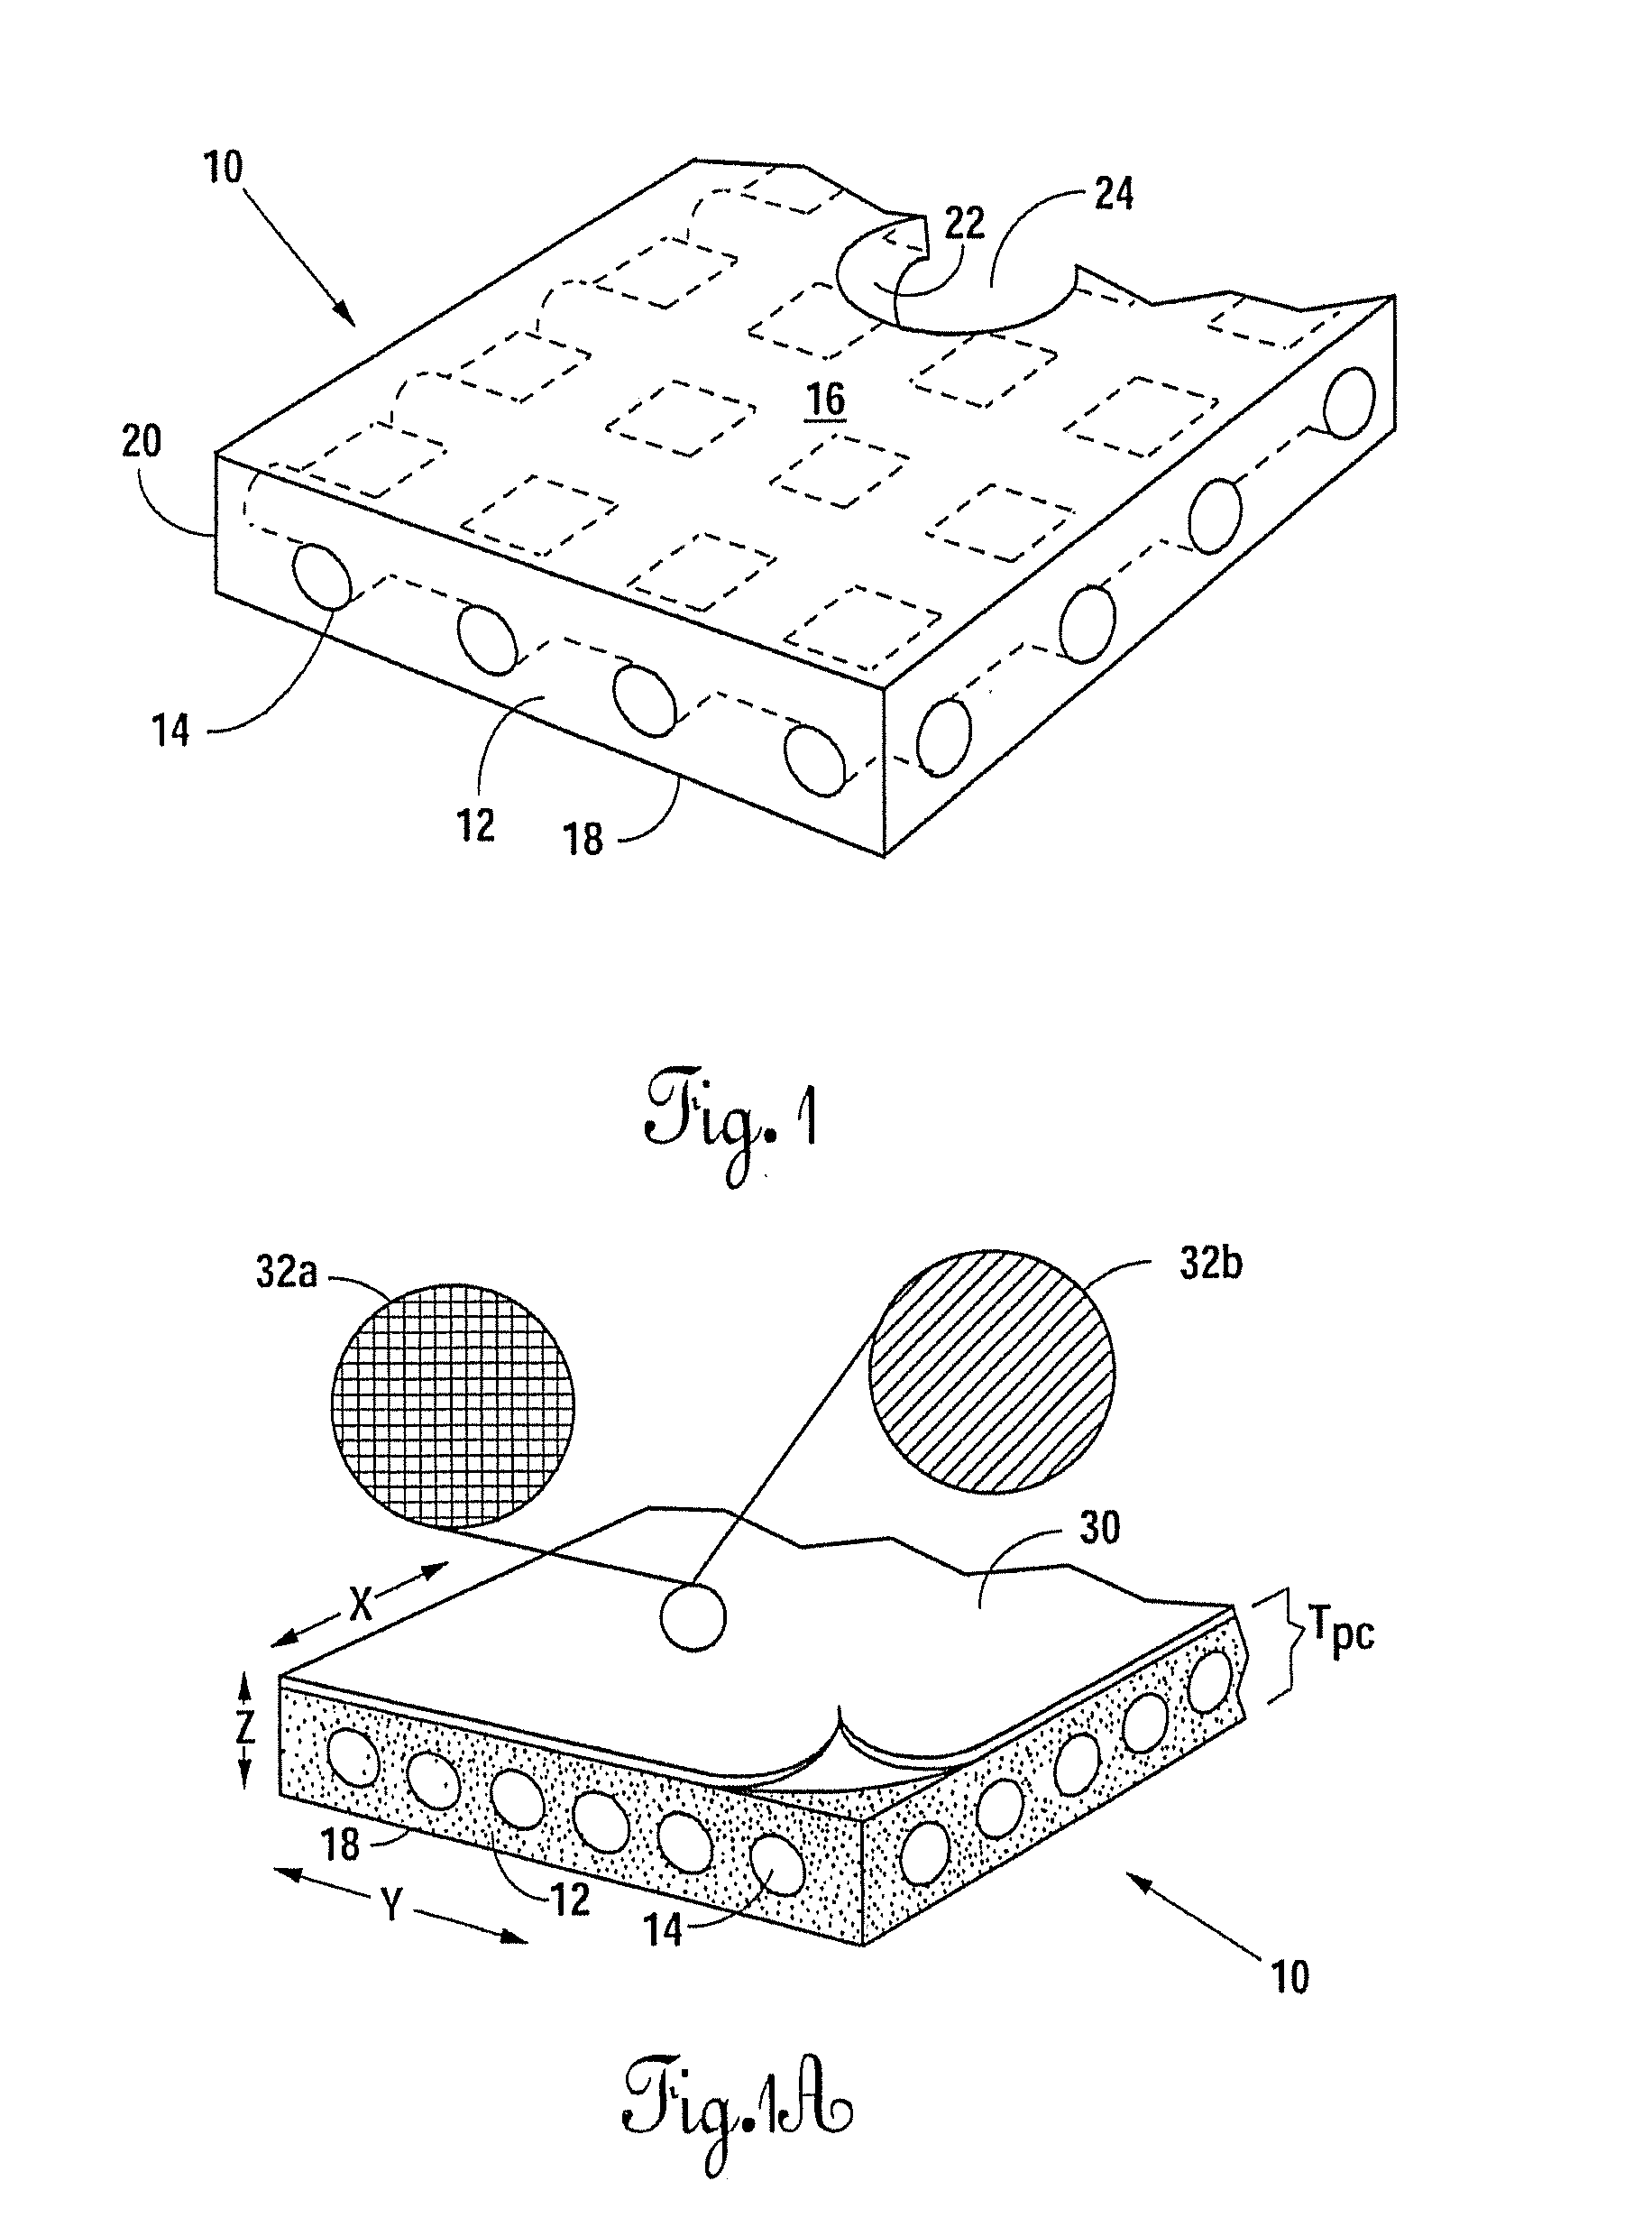 Elastomeric gel body gasket having a substantially incompressible skeleton, a method of making and using the same